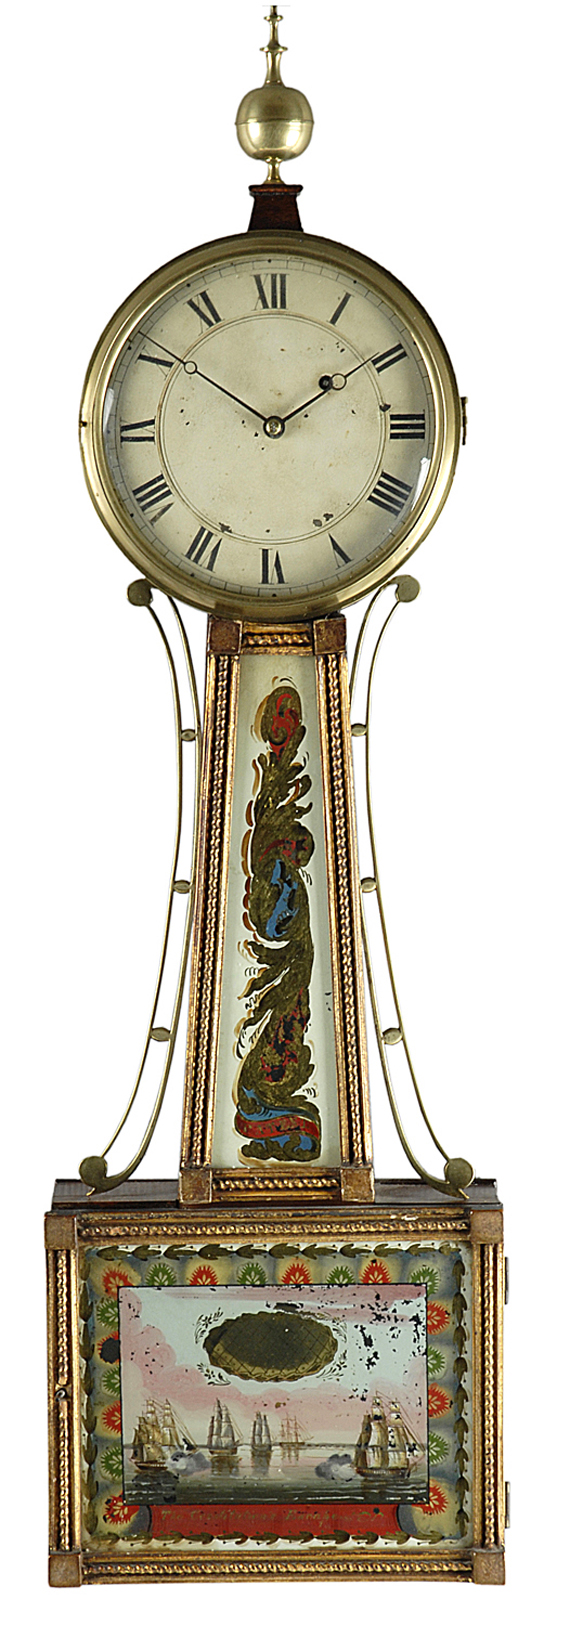 A Concord type patent time piece with fine reverse painted panels, attributed to Daniel Munroe, Concord, Massachusetts, circa 1815